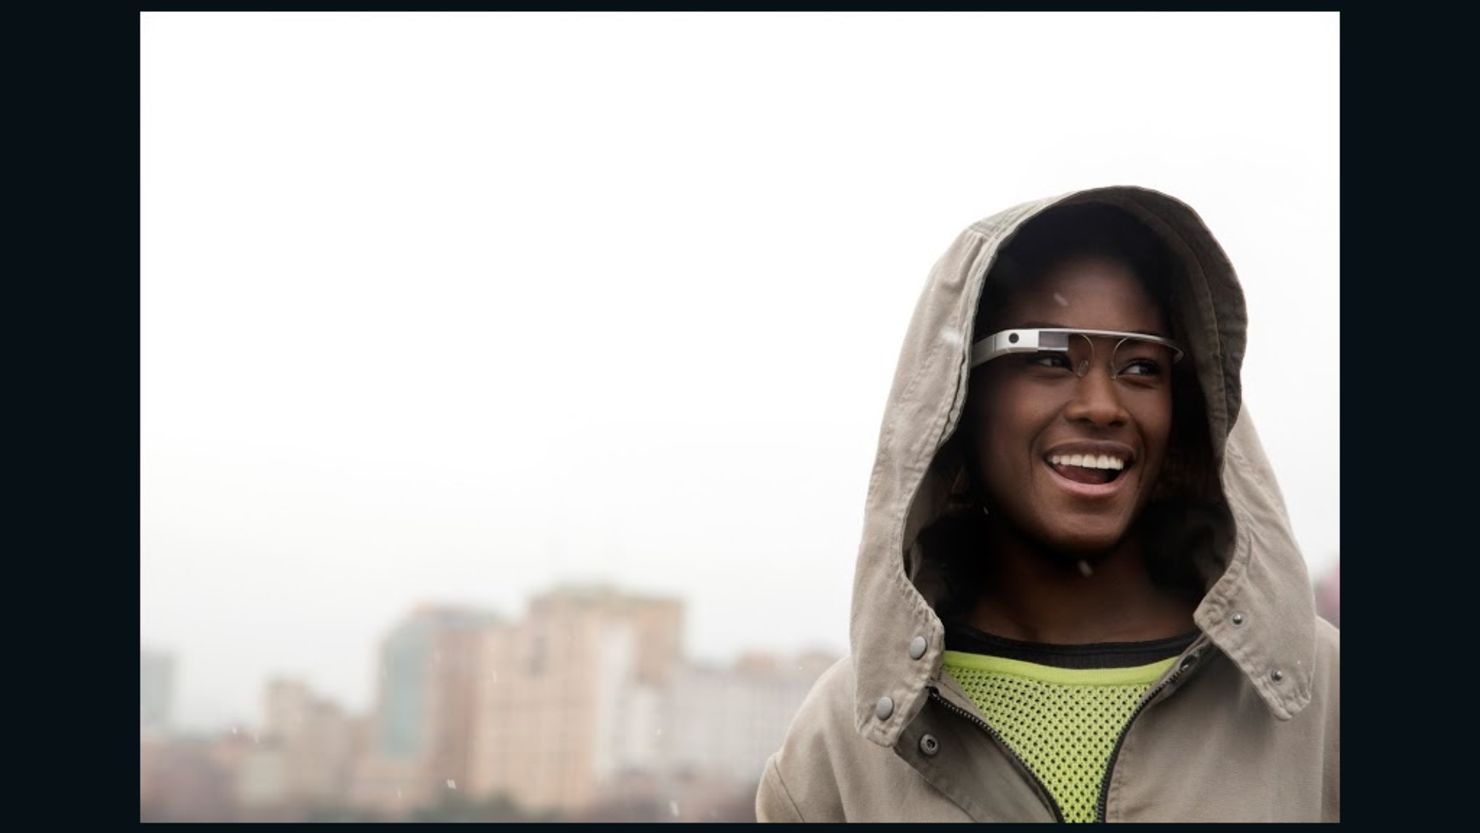 Code in the software for Google's Glass eyewear suggests users will be able to snap photos with a wink of an eye.